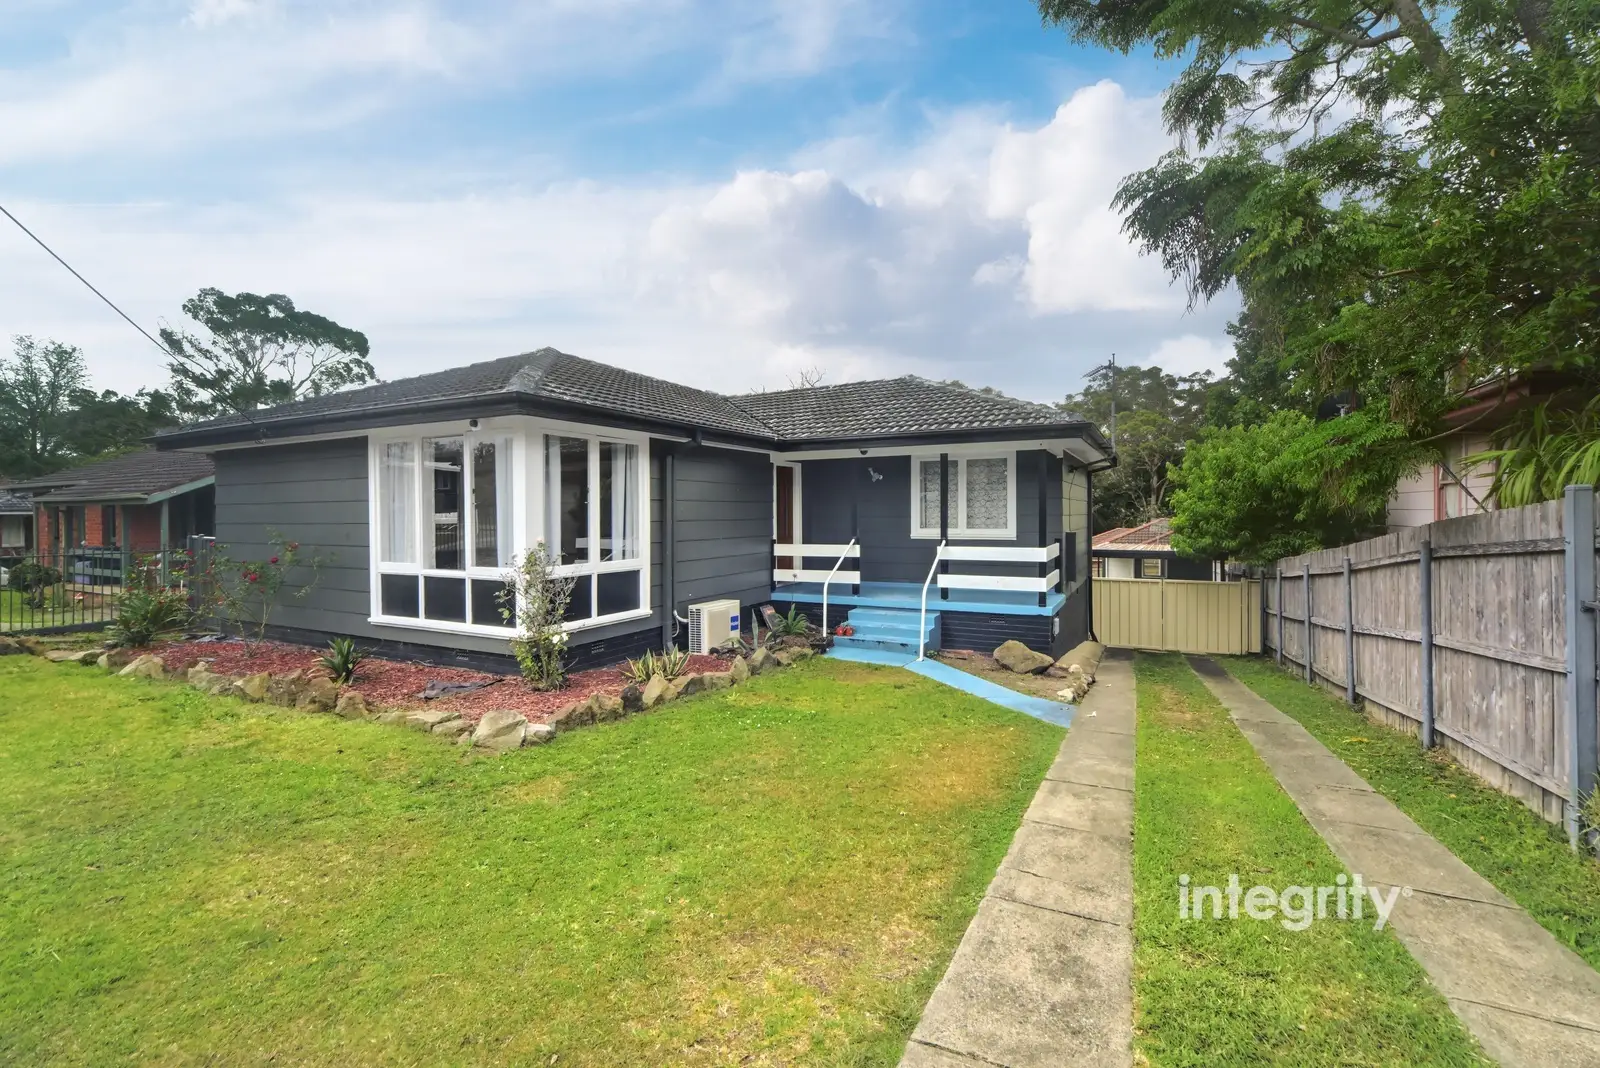 35 Leonard Street, Bomaderry Leased by Integrity Real Estate